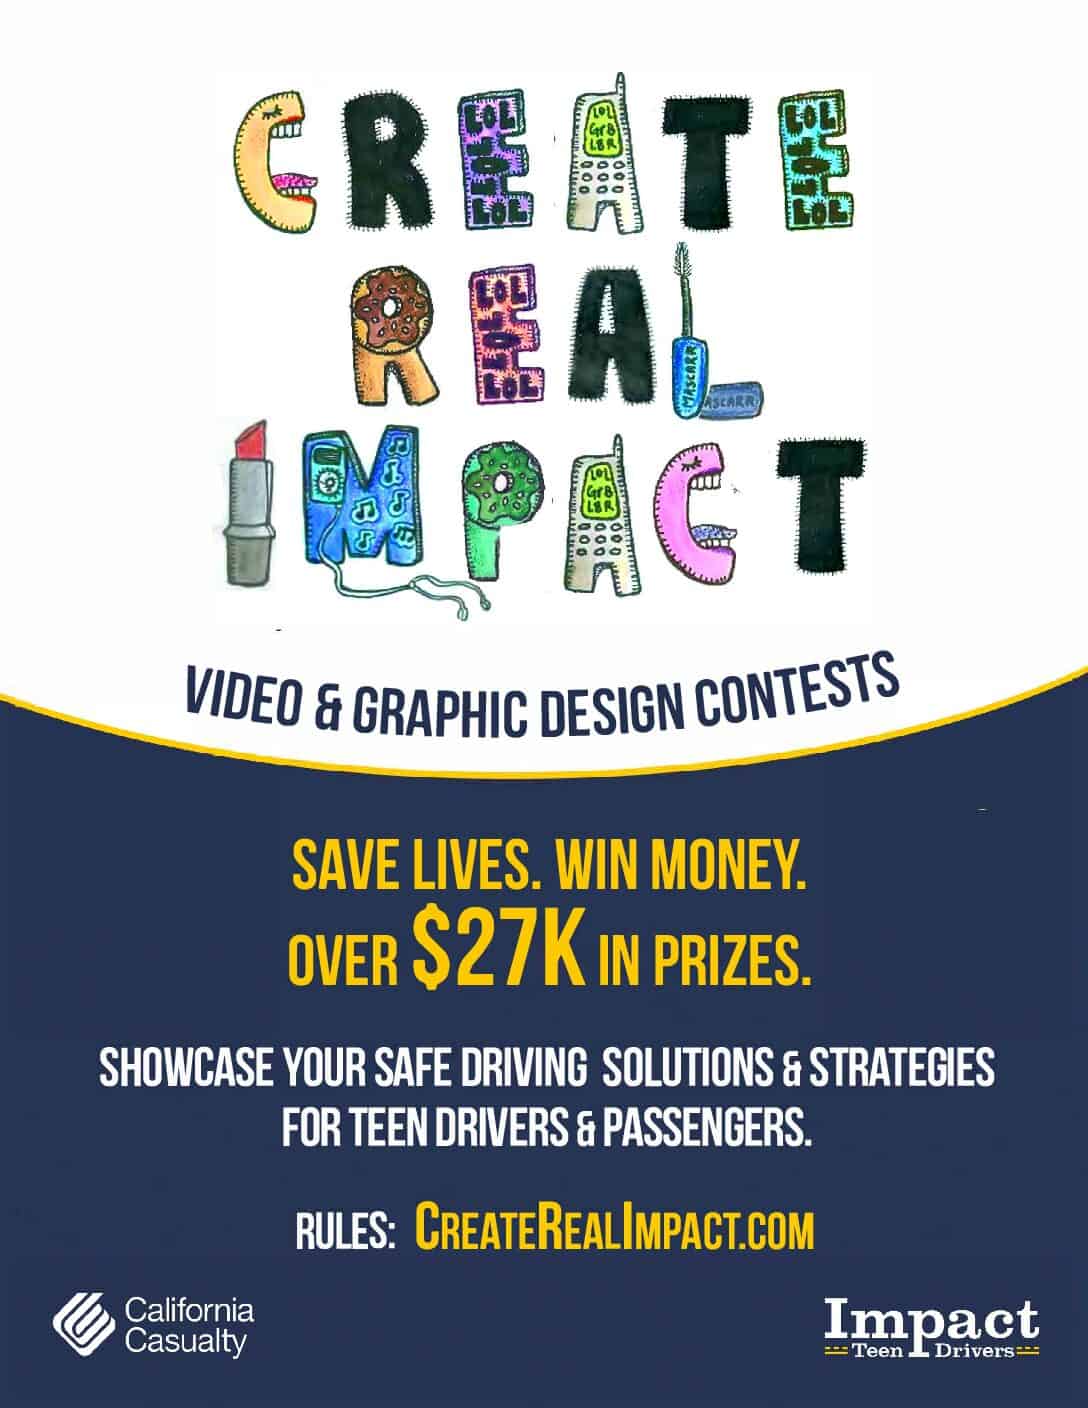 Time to GET CREATIVE and SPEAK OUT about the #1 KILLER of YOUNG PEOPLE: WIN A SHARE OF $27,000!